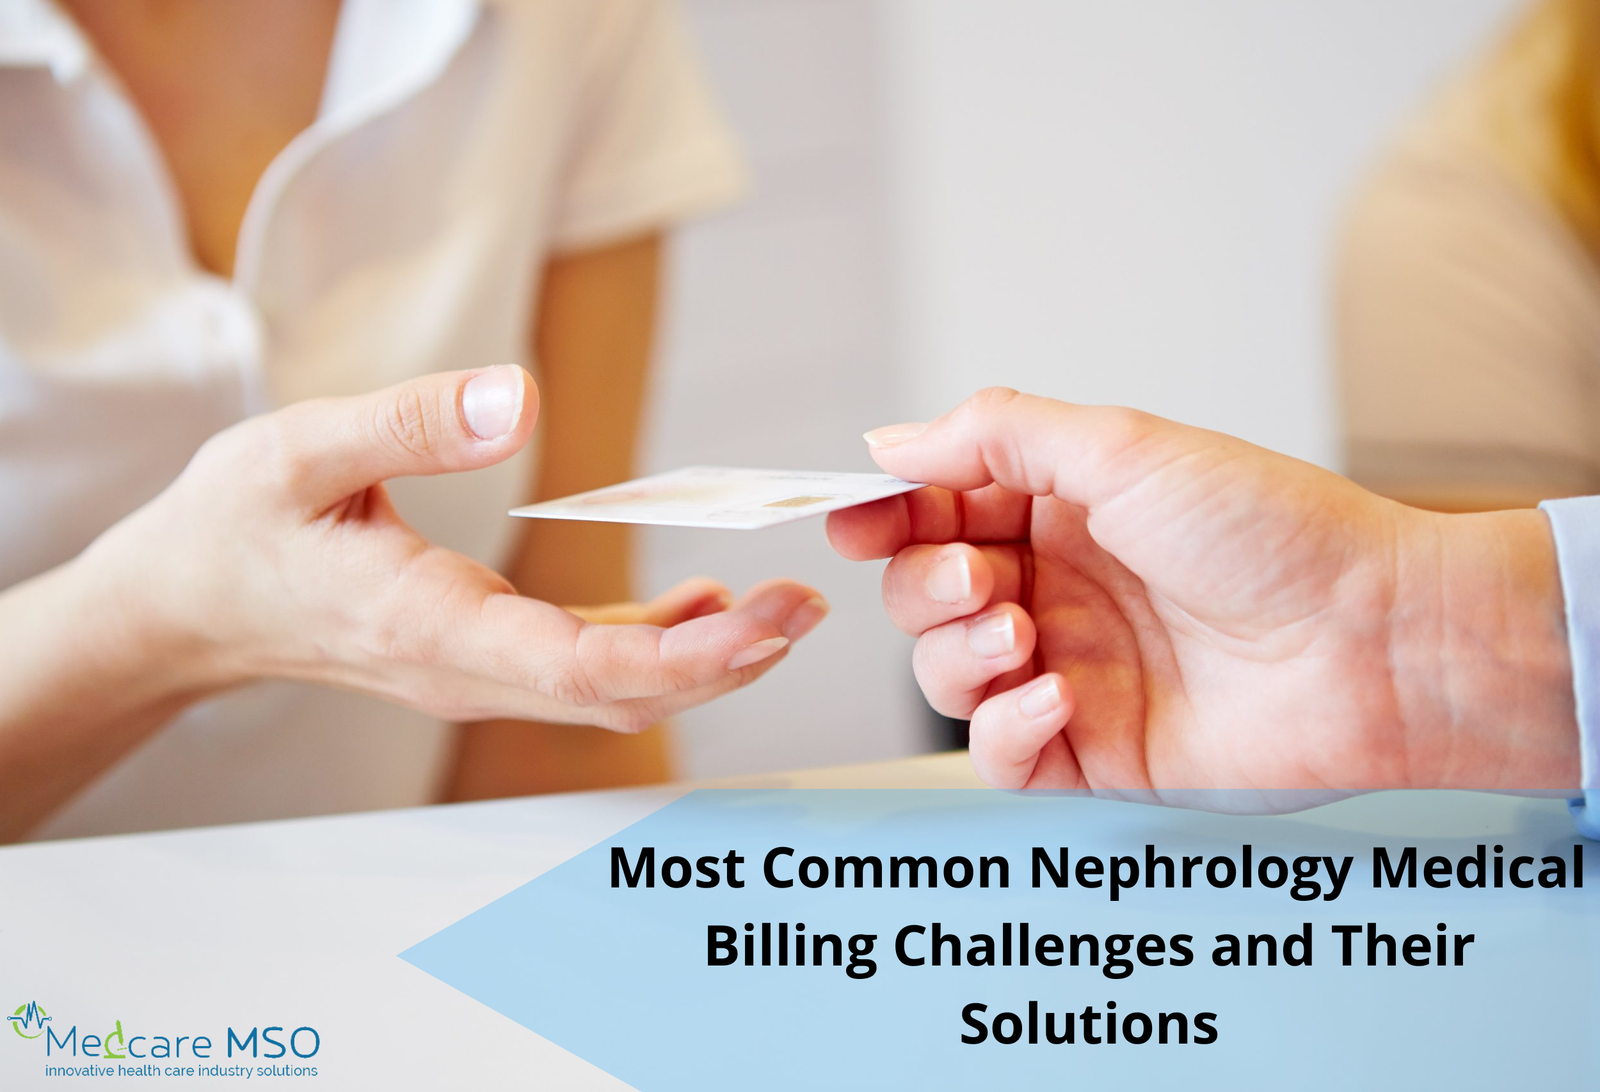 Most Common Nephrology Medical Billing Challenges and Their Solutions